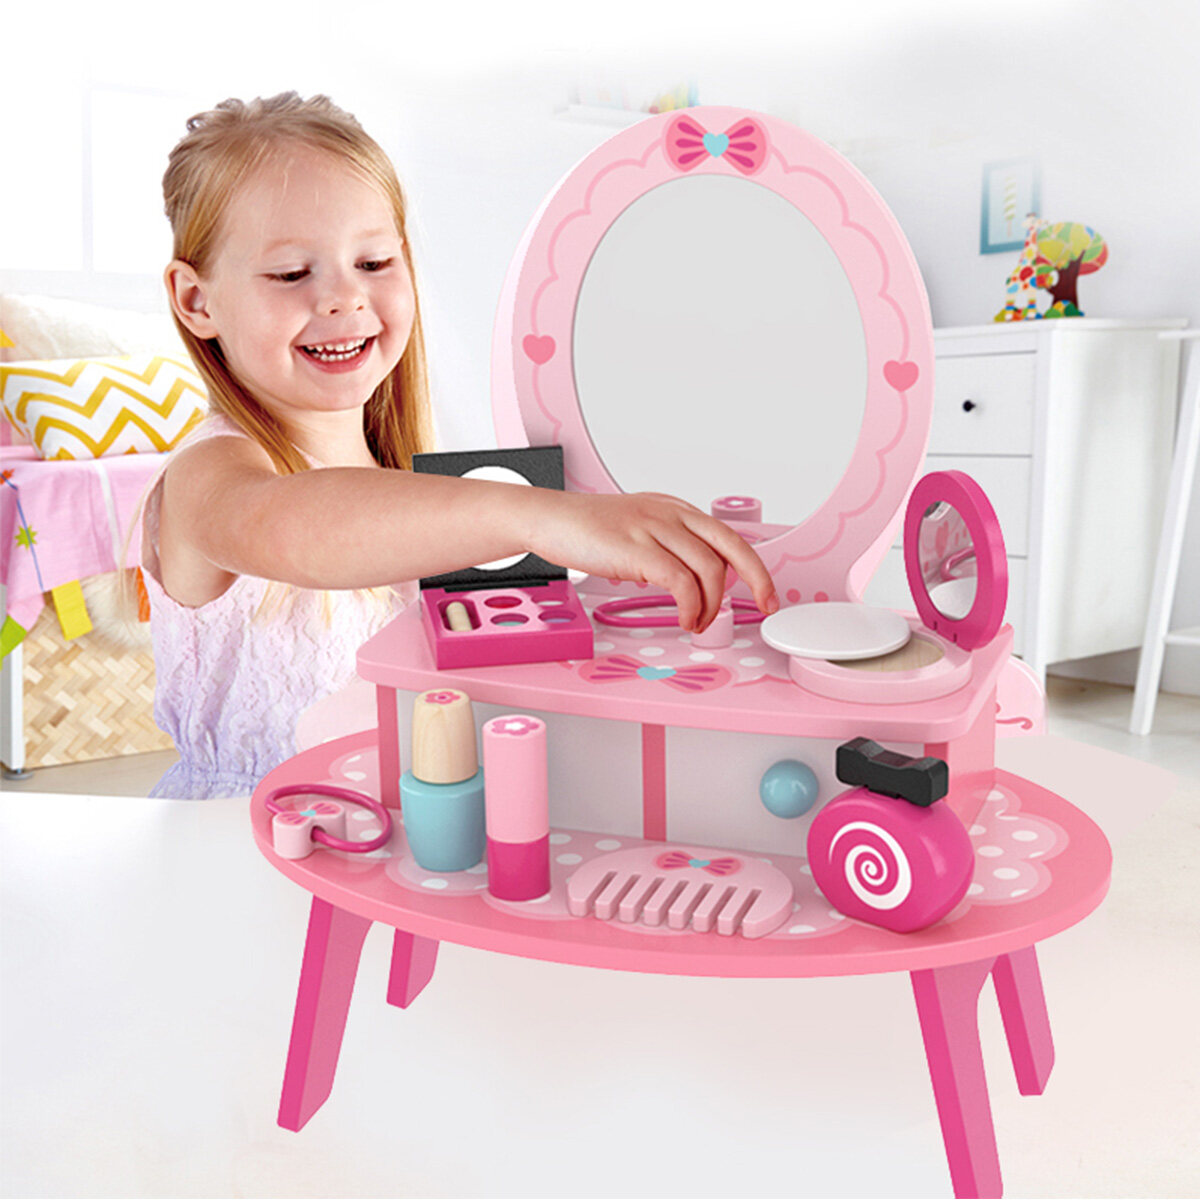 Pretend Play Kids Vanity Set - Beauty Princess Dressing Wooden Table - Wooden Beauty Play Set With Vanity and Accessories